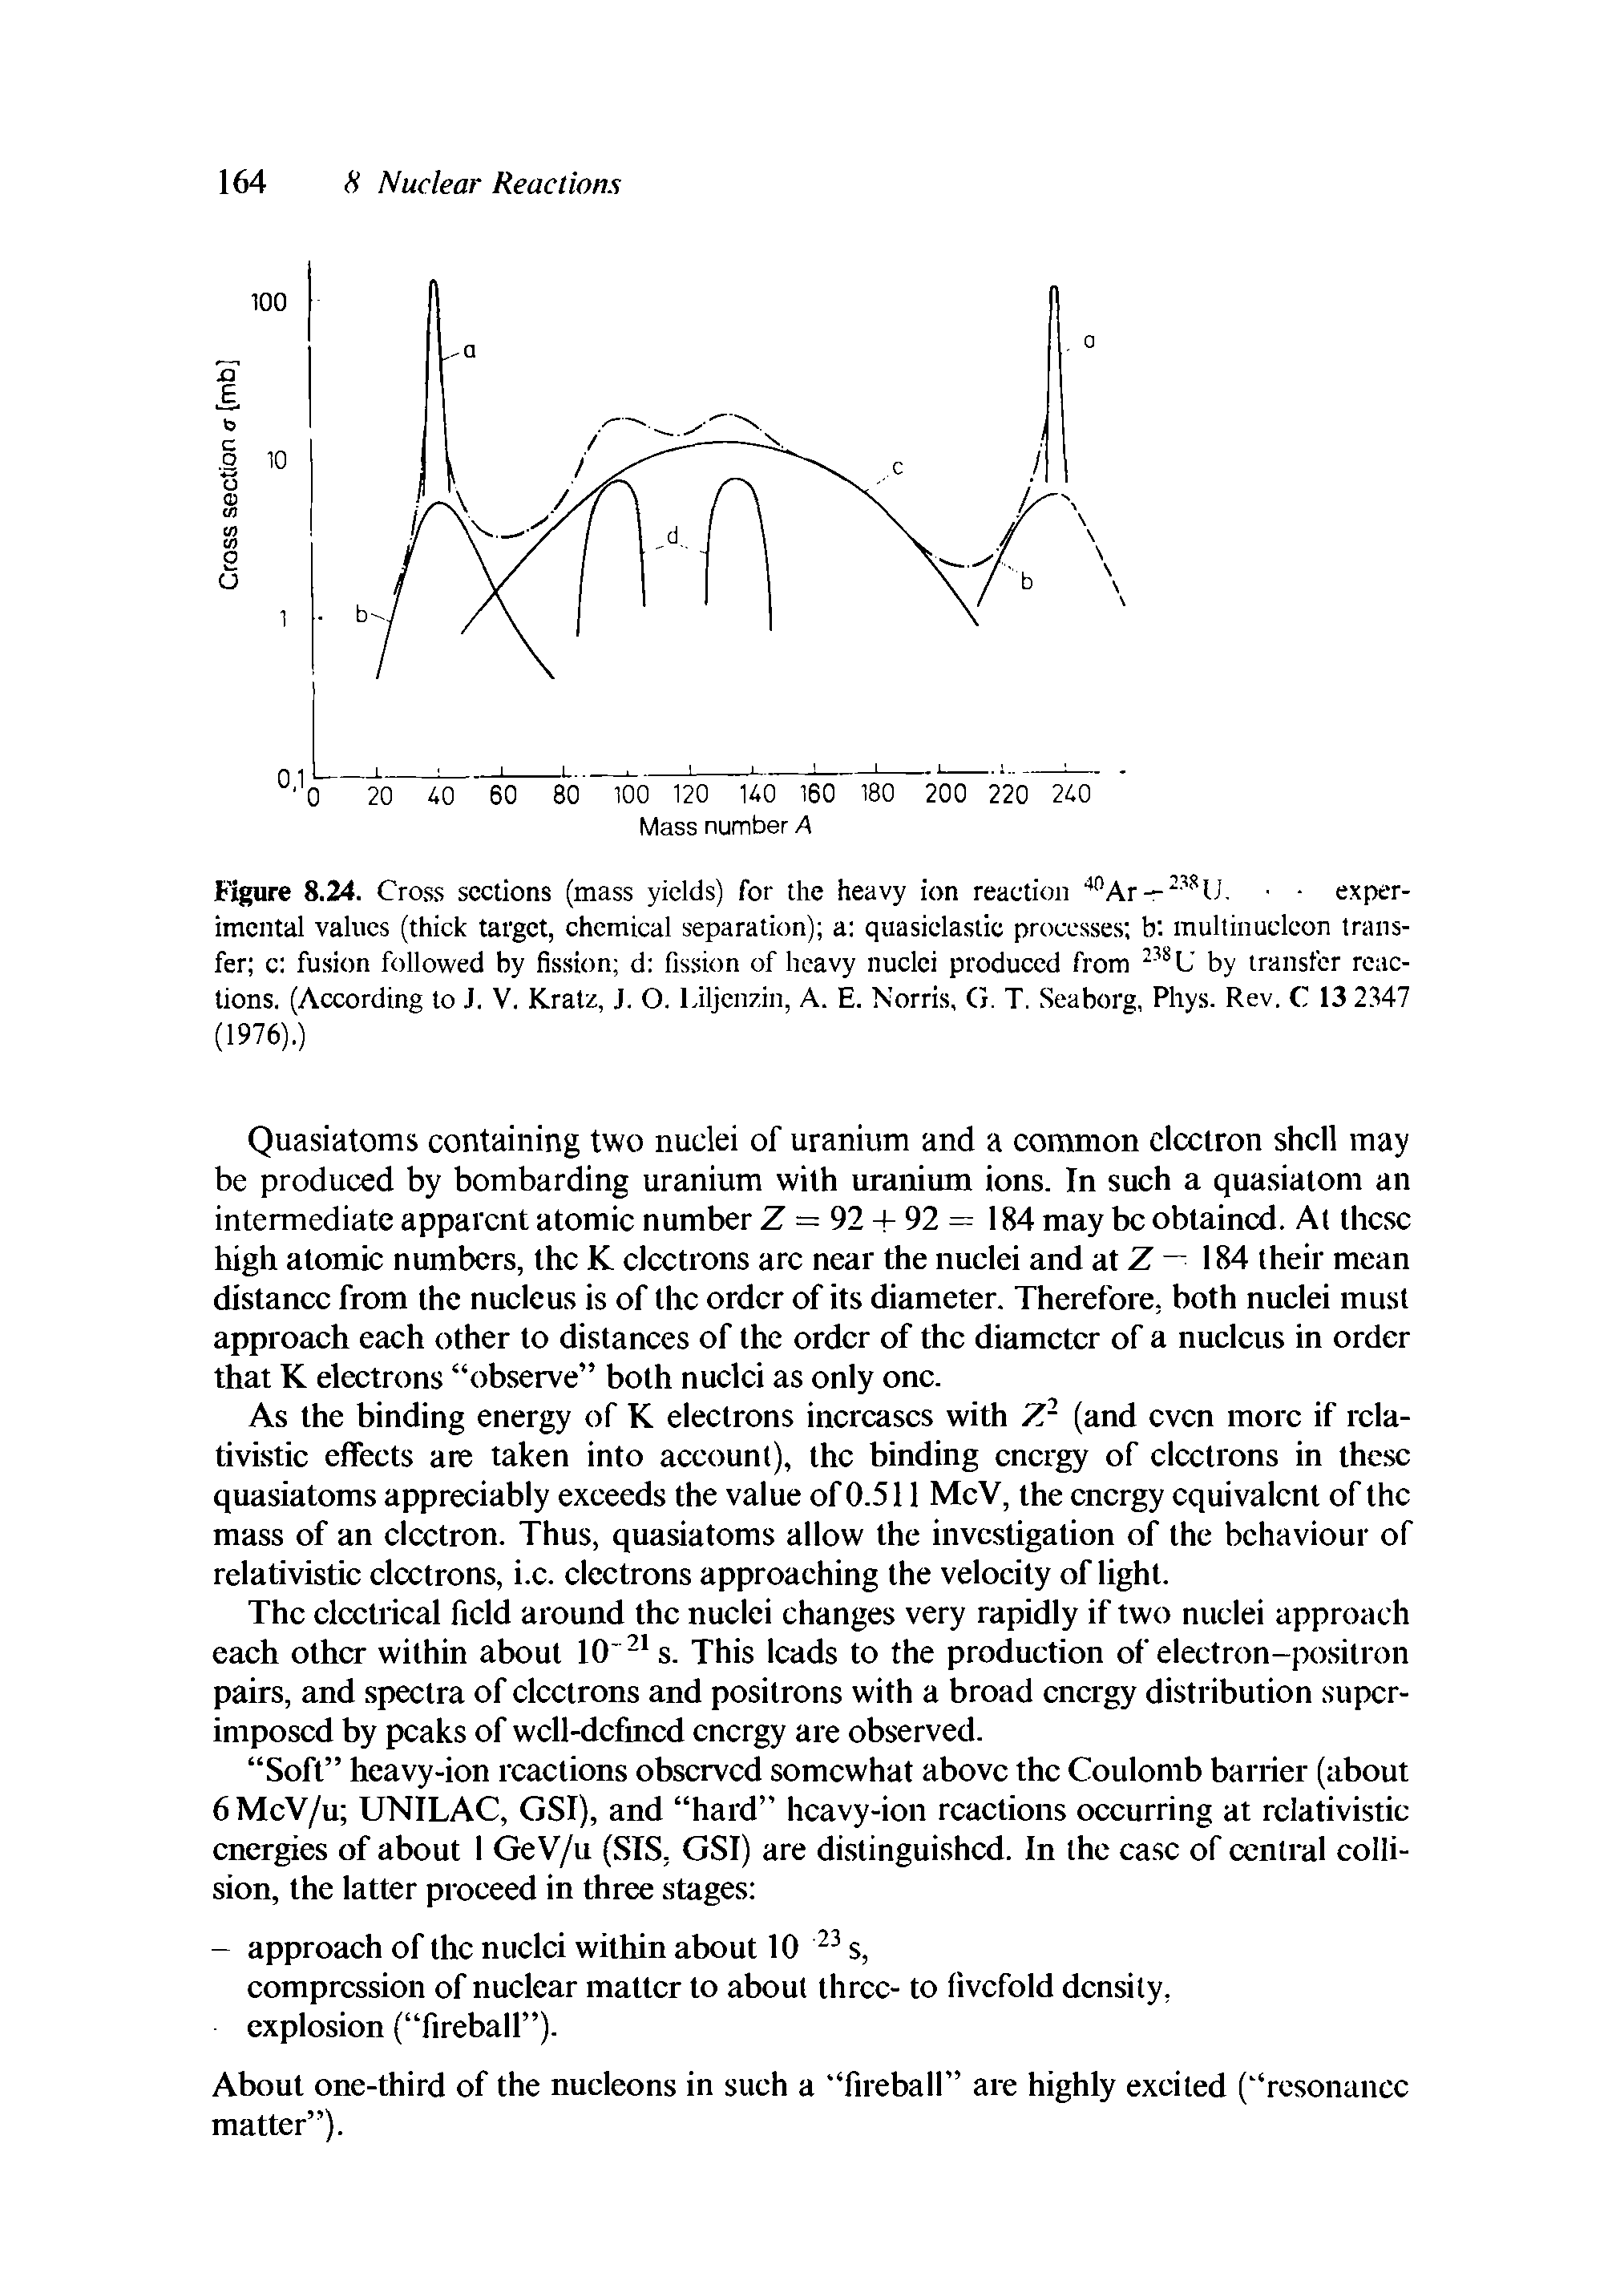 Figure 8.24. Cro.s.s sections (mass yields) for the heavy ion reaction Ar — - experimental values (thick target, chemical separation) a quasiclastic processes b multinuclcon transfer c fusion followed by fission d fis.sion of heavy nuclei produced from by transfer reactions. (According to J. V. KraU, J. O. Liljenzin, A. E. Norris, C], T. Seaborg, Phys. Rev. C 13 2347 (1976).)...